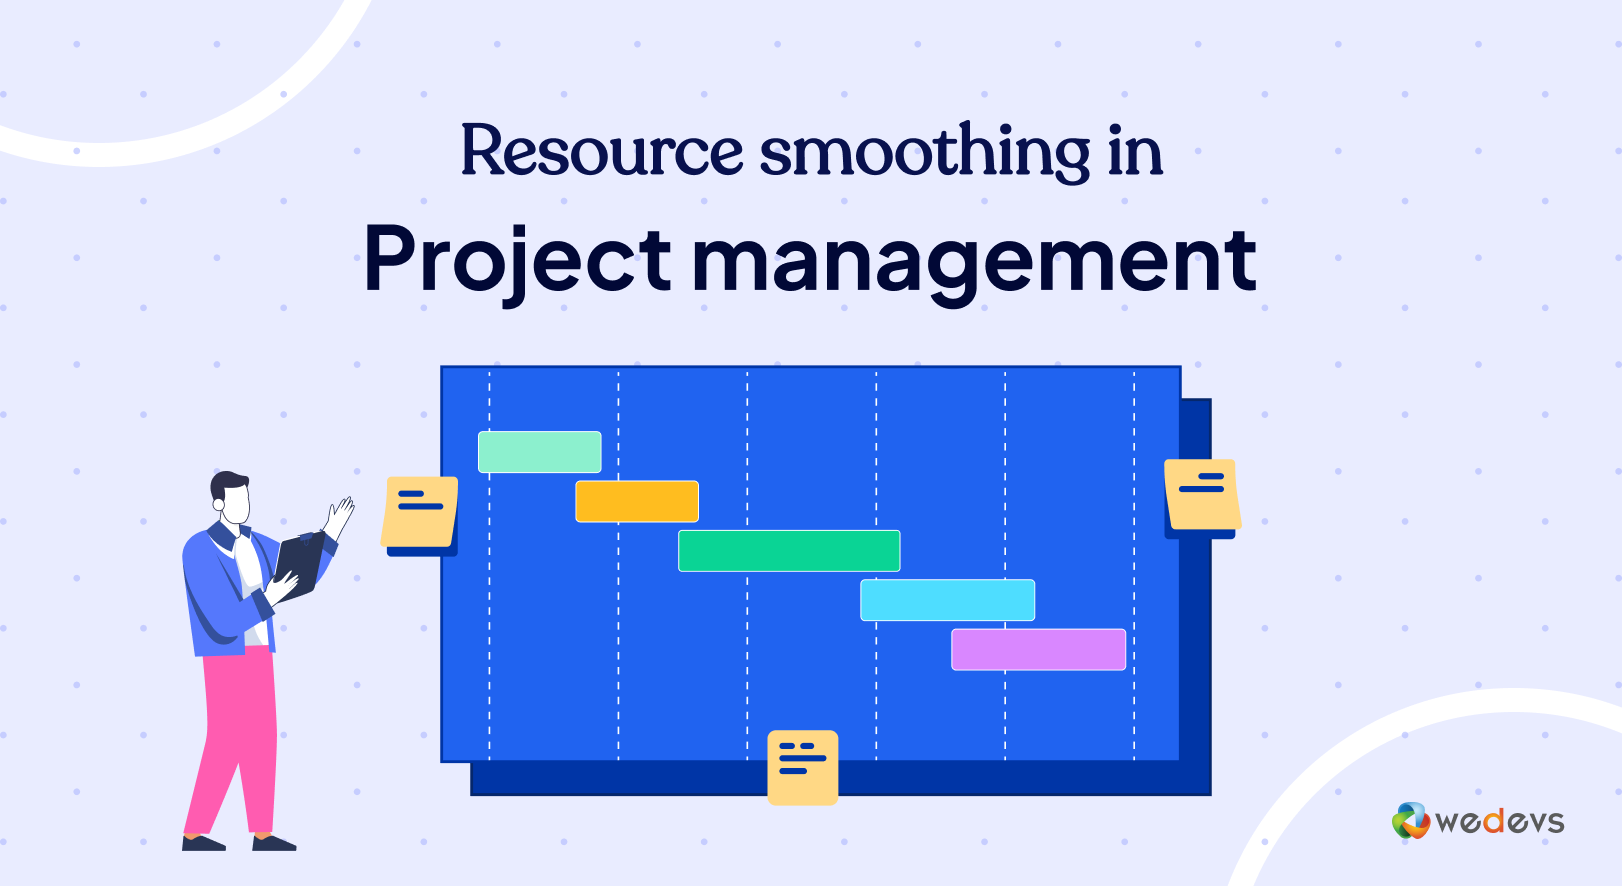 All You Need to Know About Resource Smoothing in Project Management